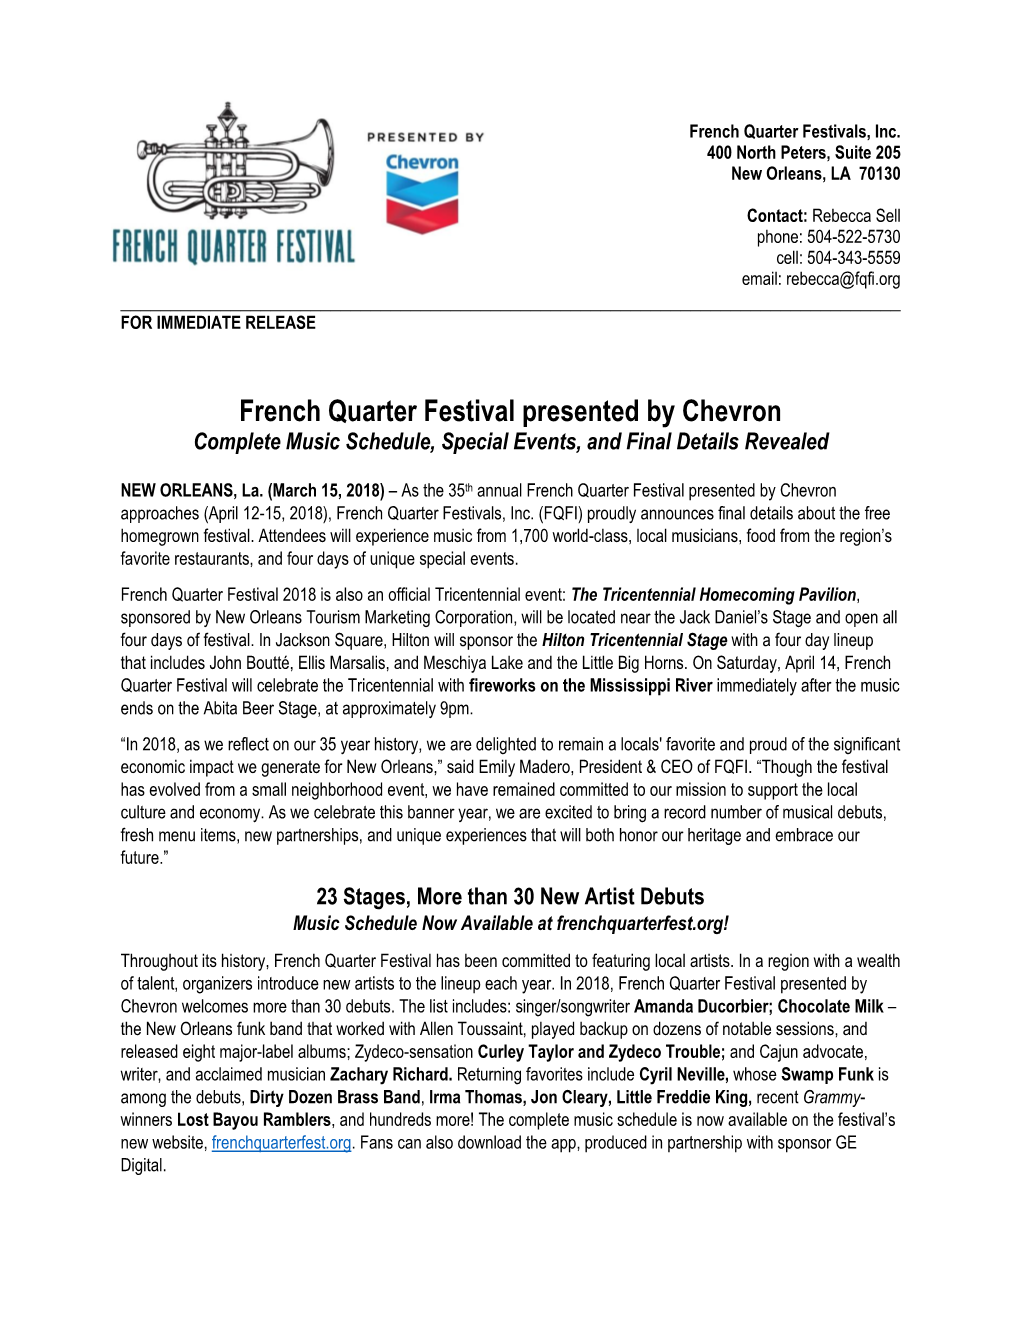 French Quarter Festival Presented by Chevron Complete Music Schedule, Special Events, and Final Details Revealed